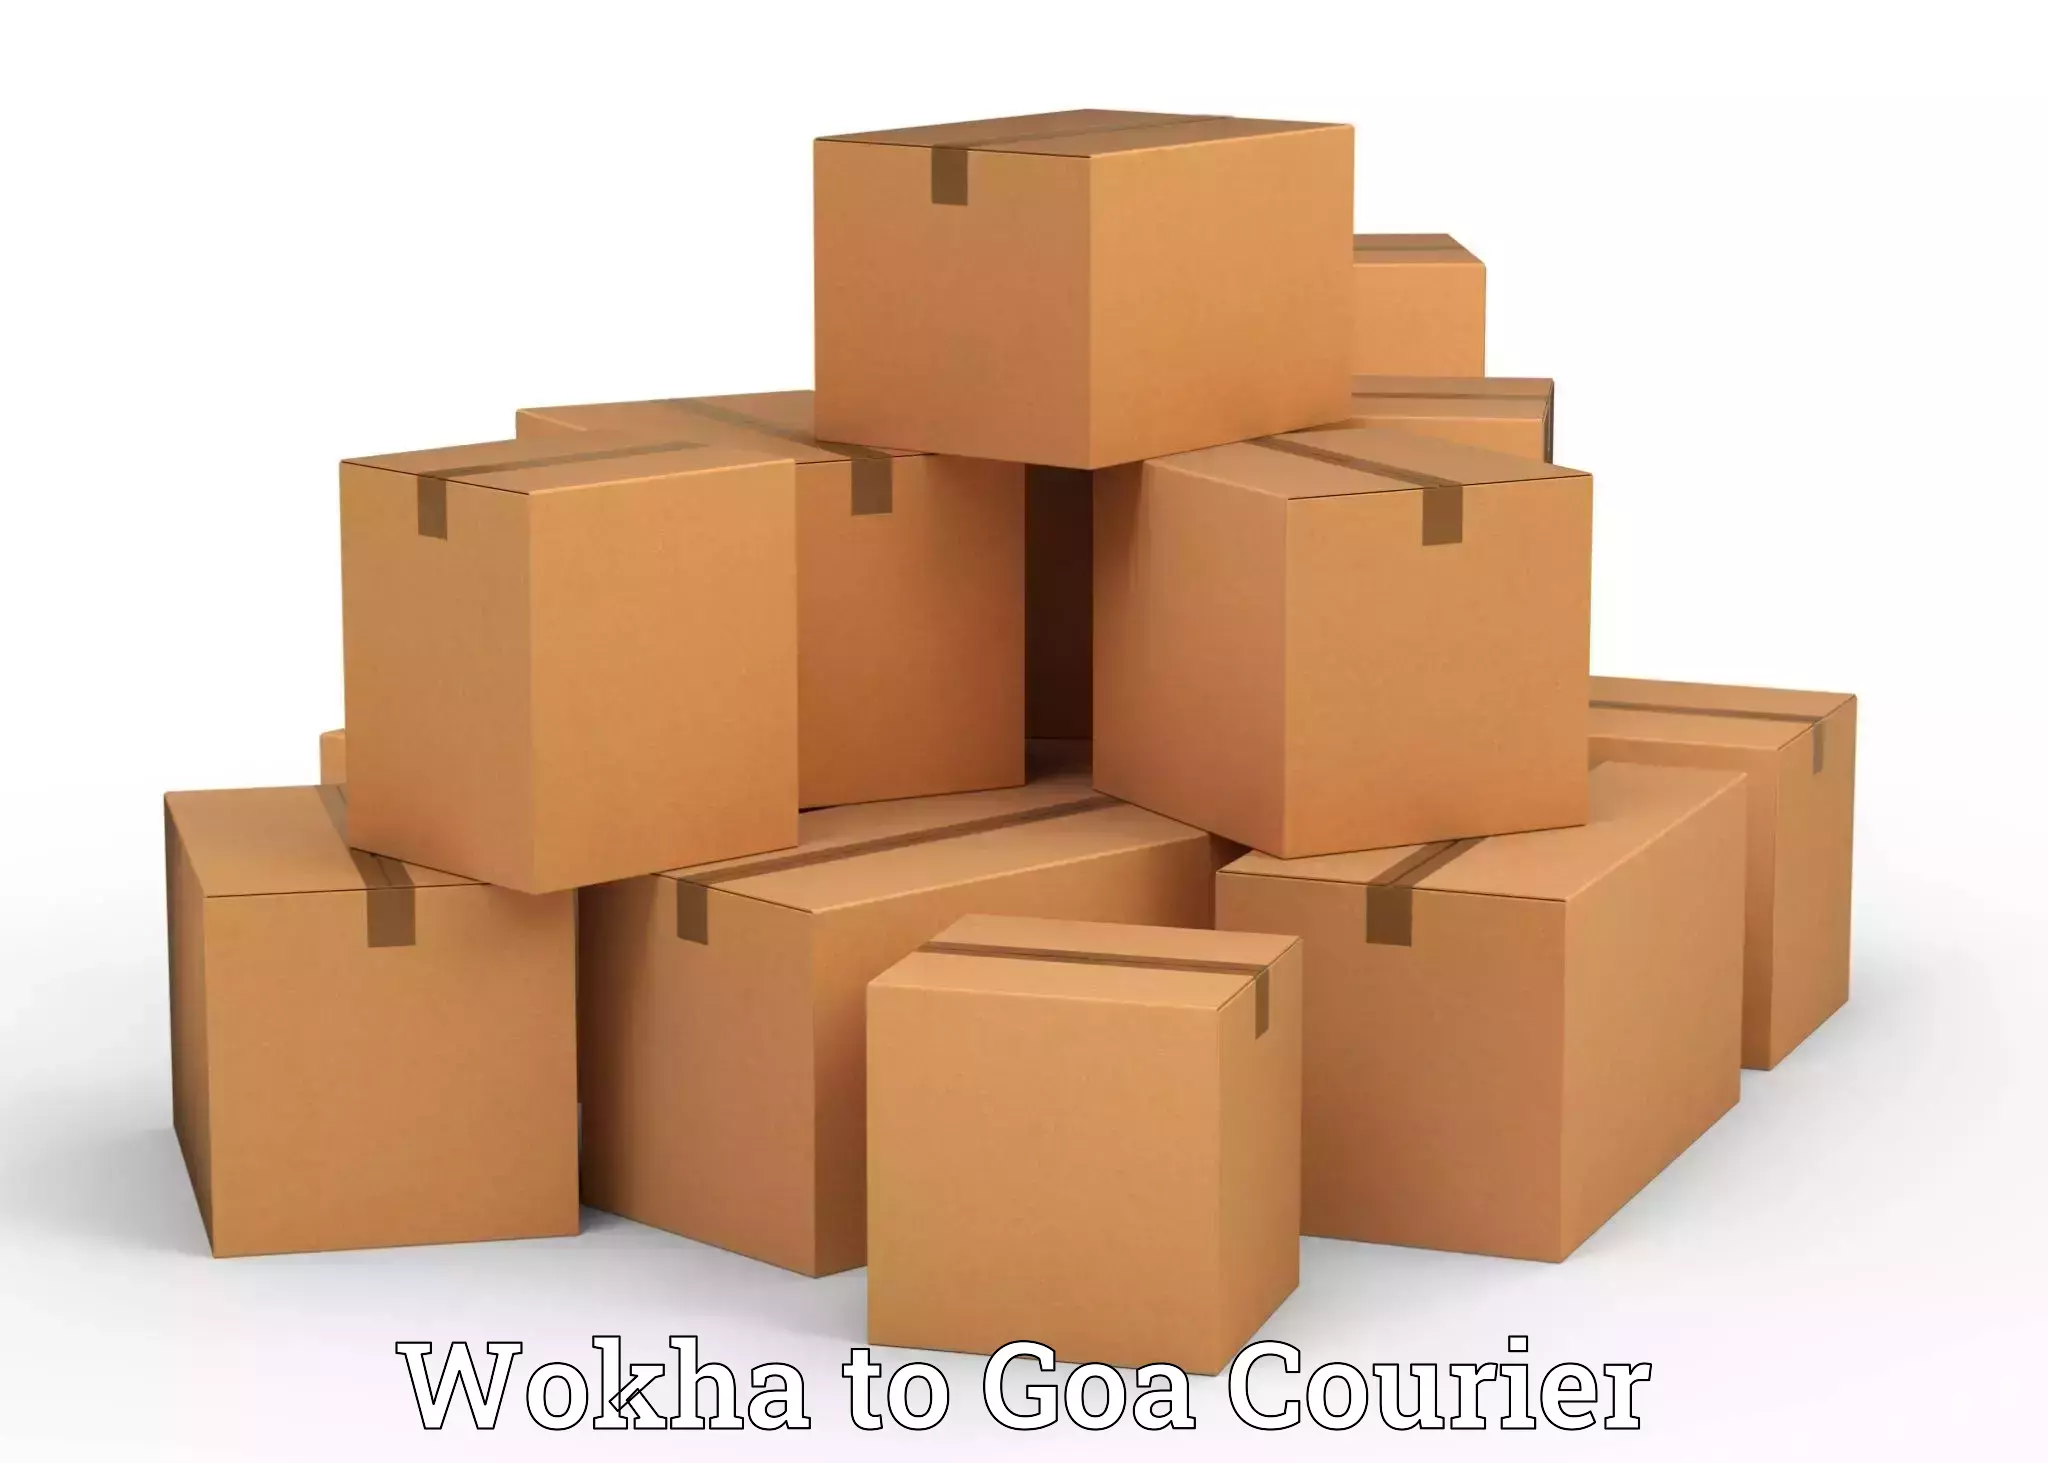 Trusted relocation experts Wokha to Goa